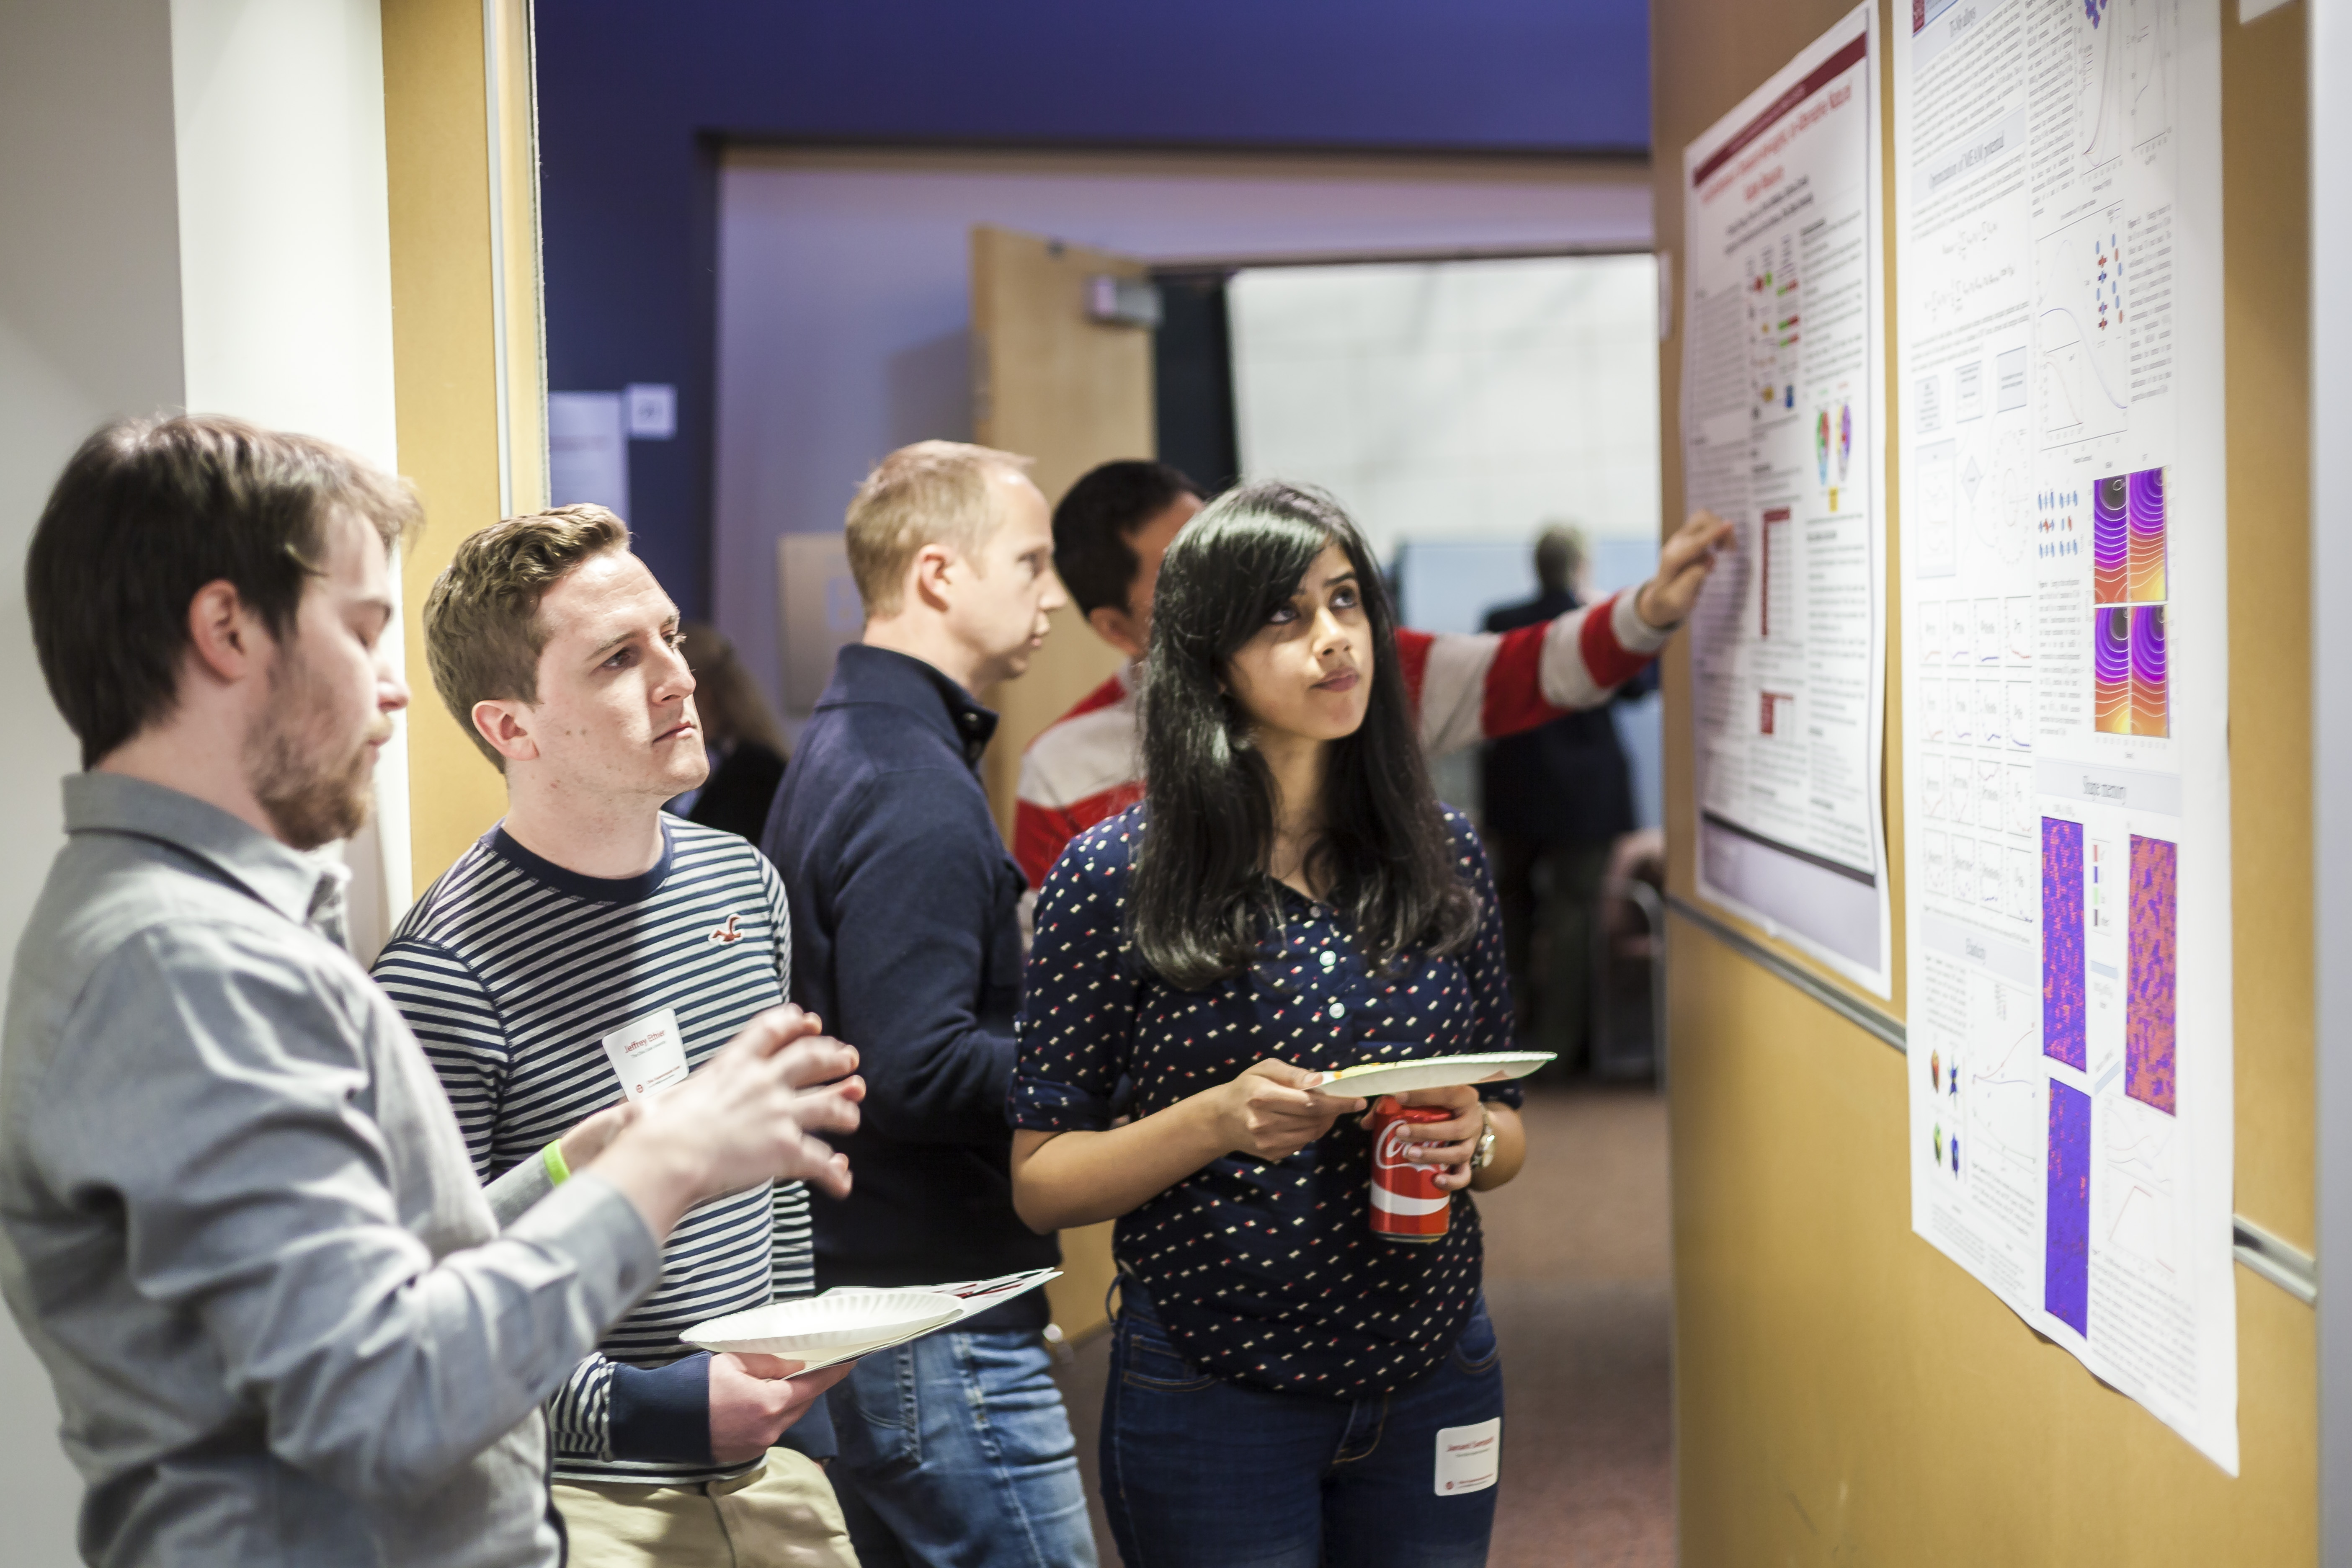 Attendees to the Dec. 3 SUG meeting discuss research during the Poster competition.